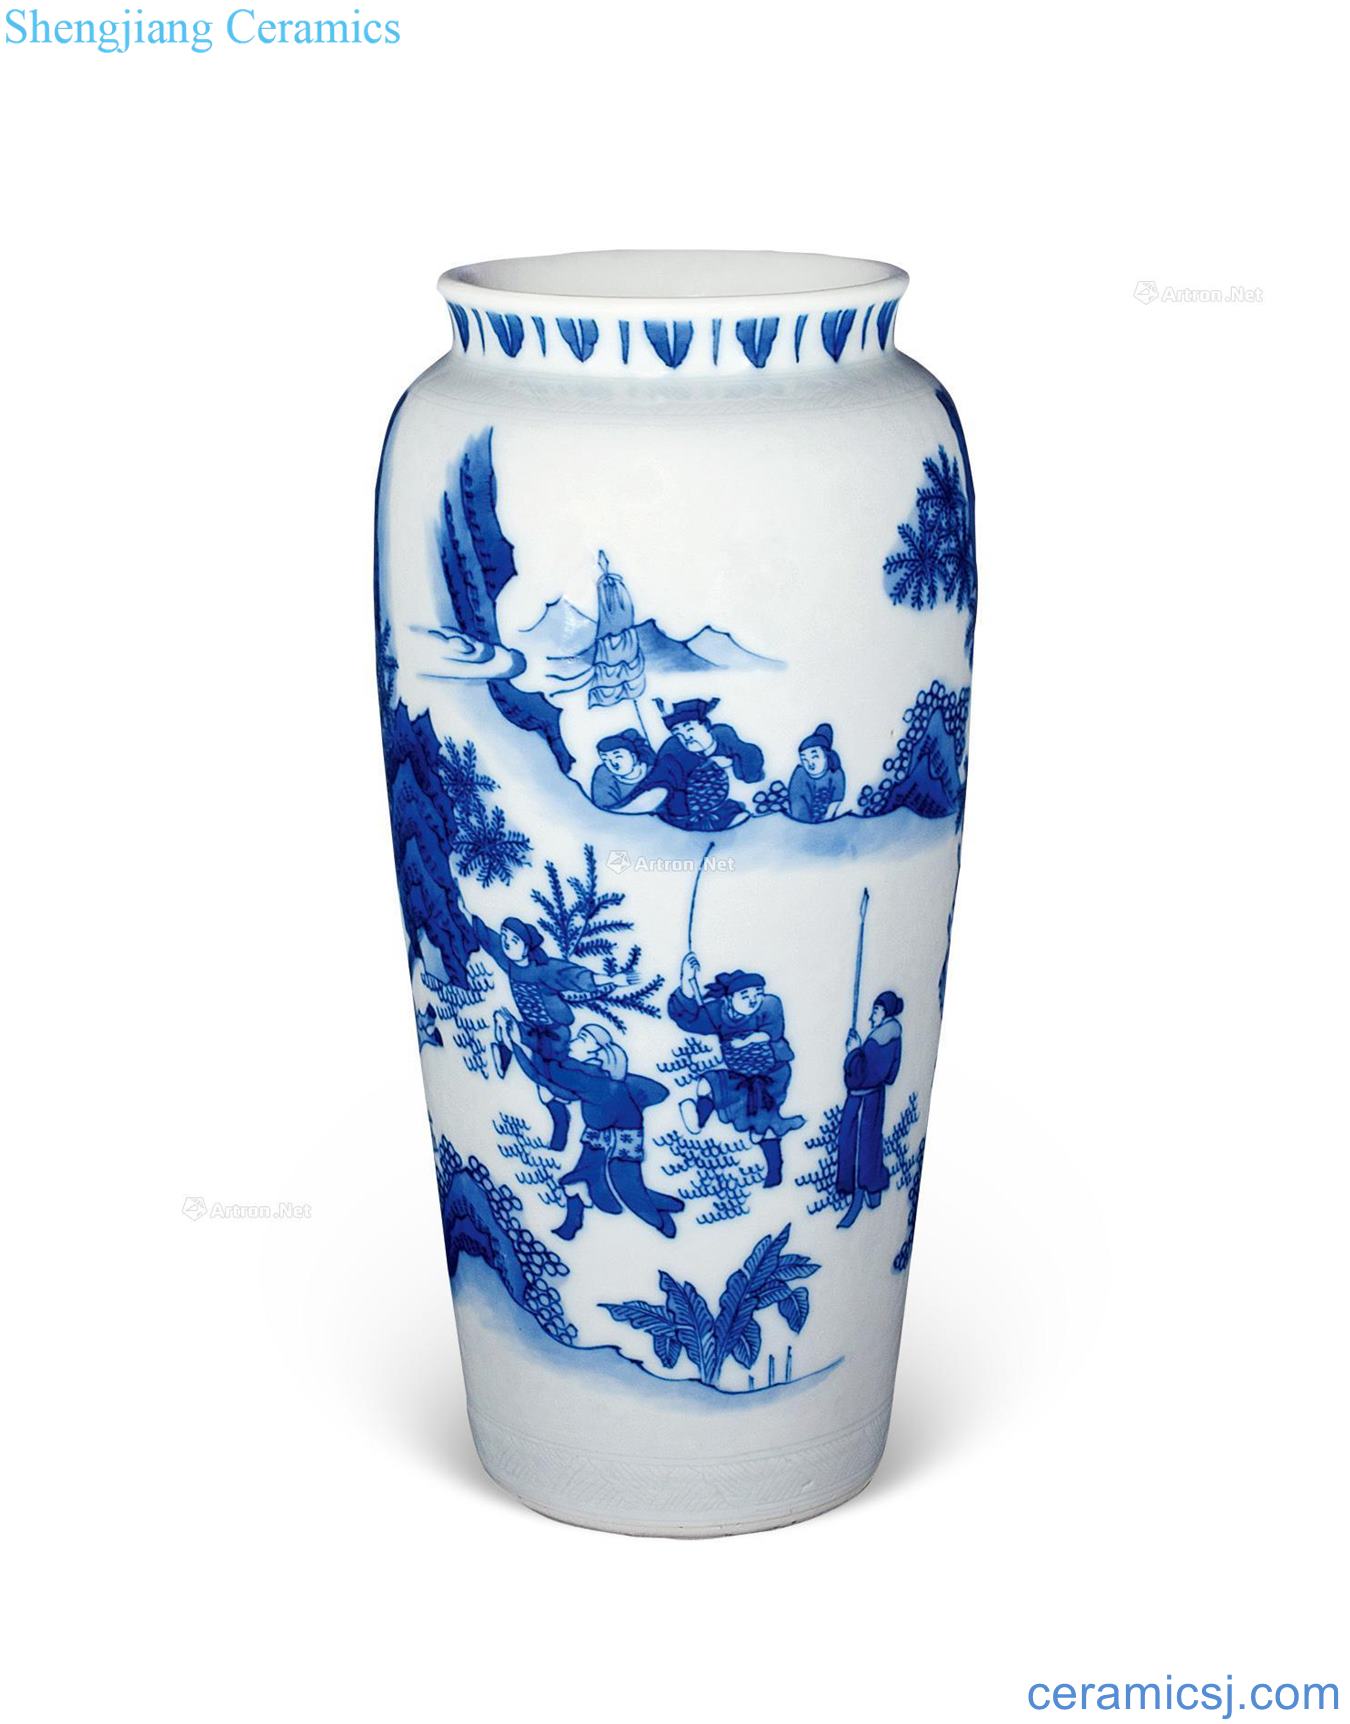 The late Ming dynasty Stories of blue and white lines lanterns